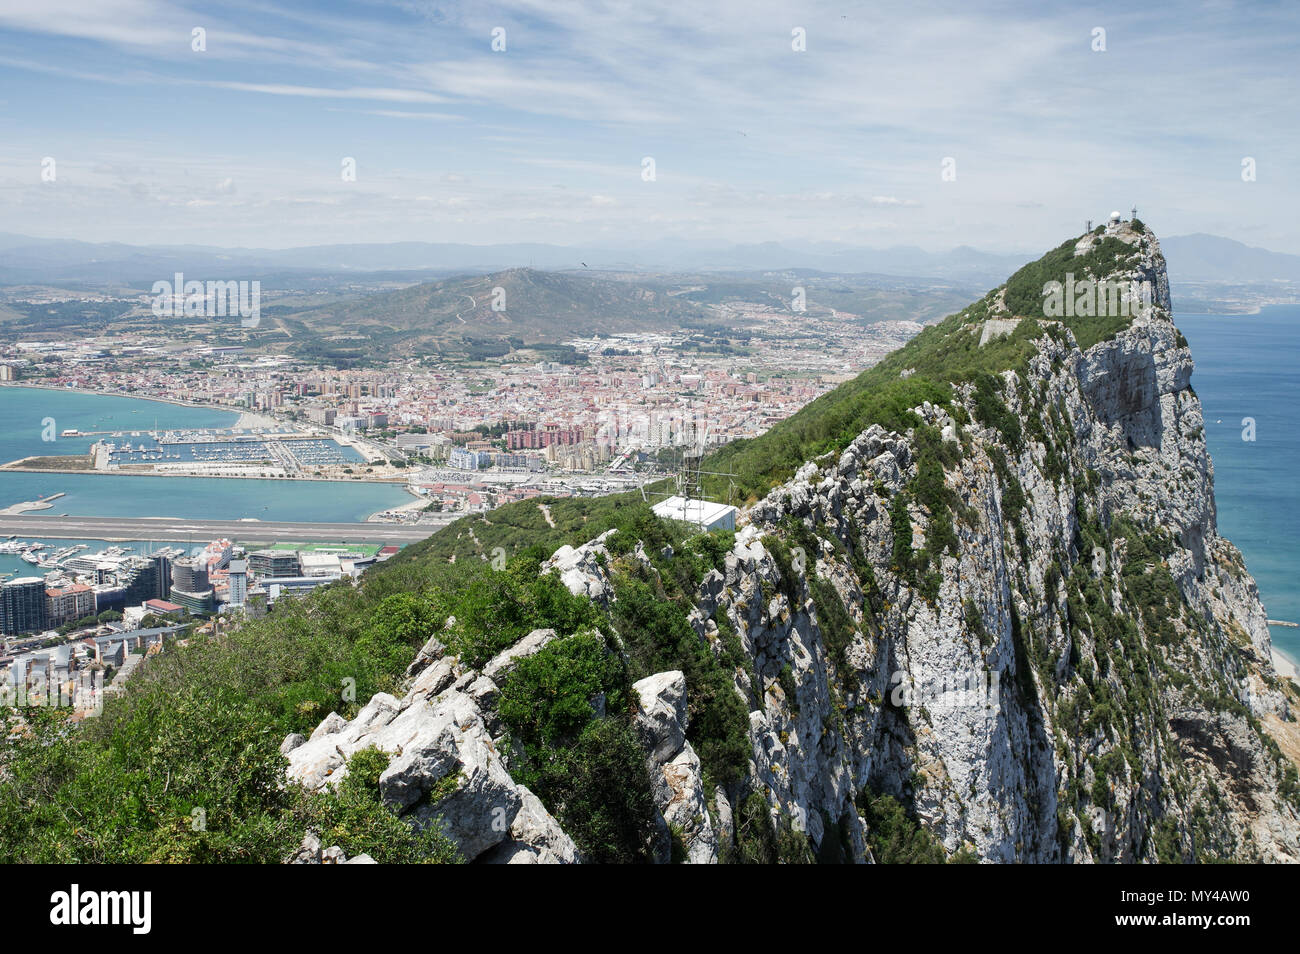 The Rock of Gibraltar and Gibraltar downtown seen from the viewing platform at the top of the cable car station Stock Photo